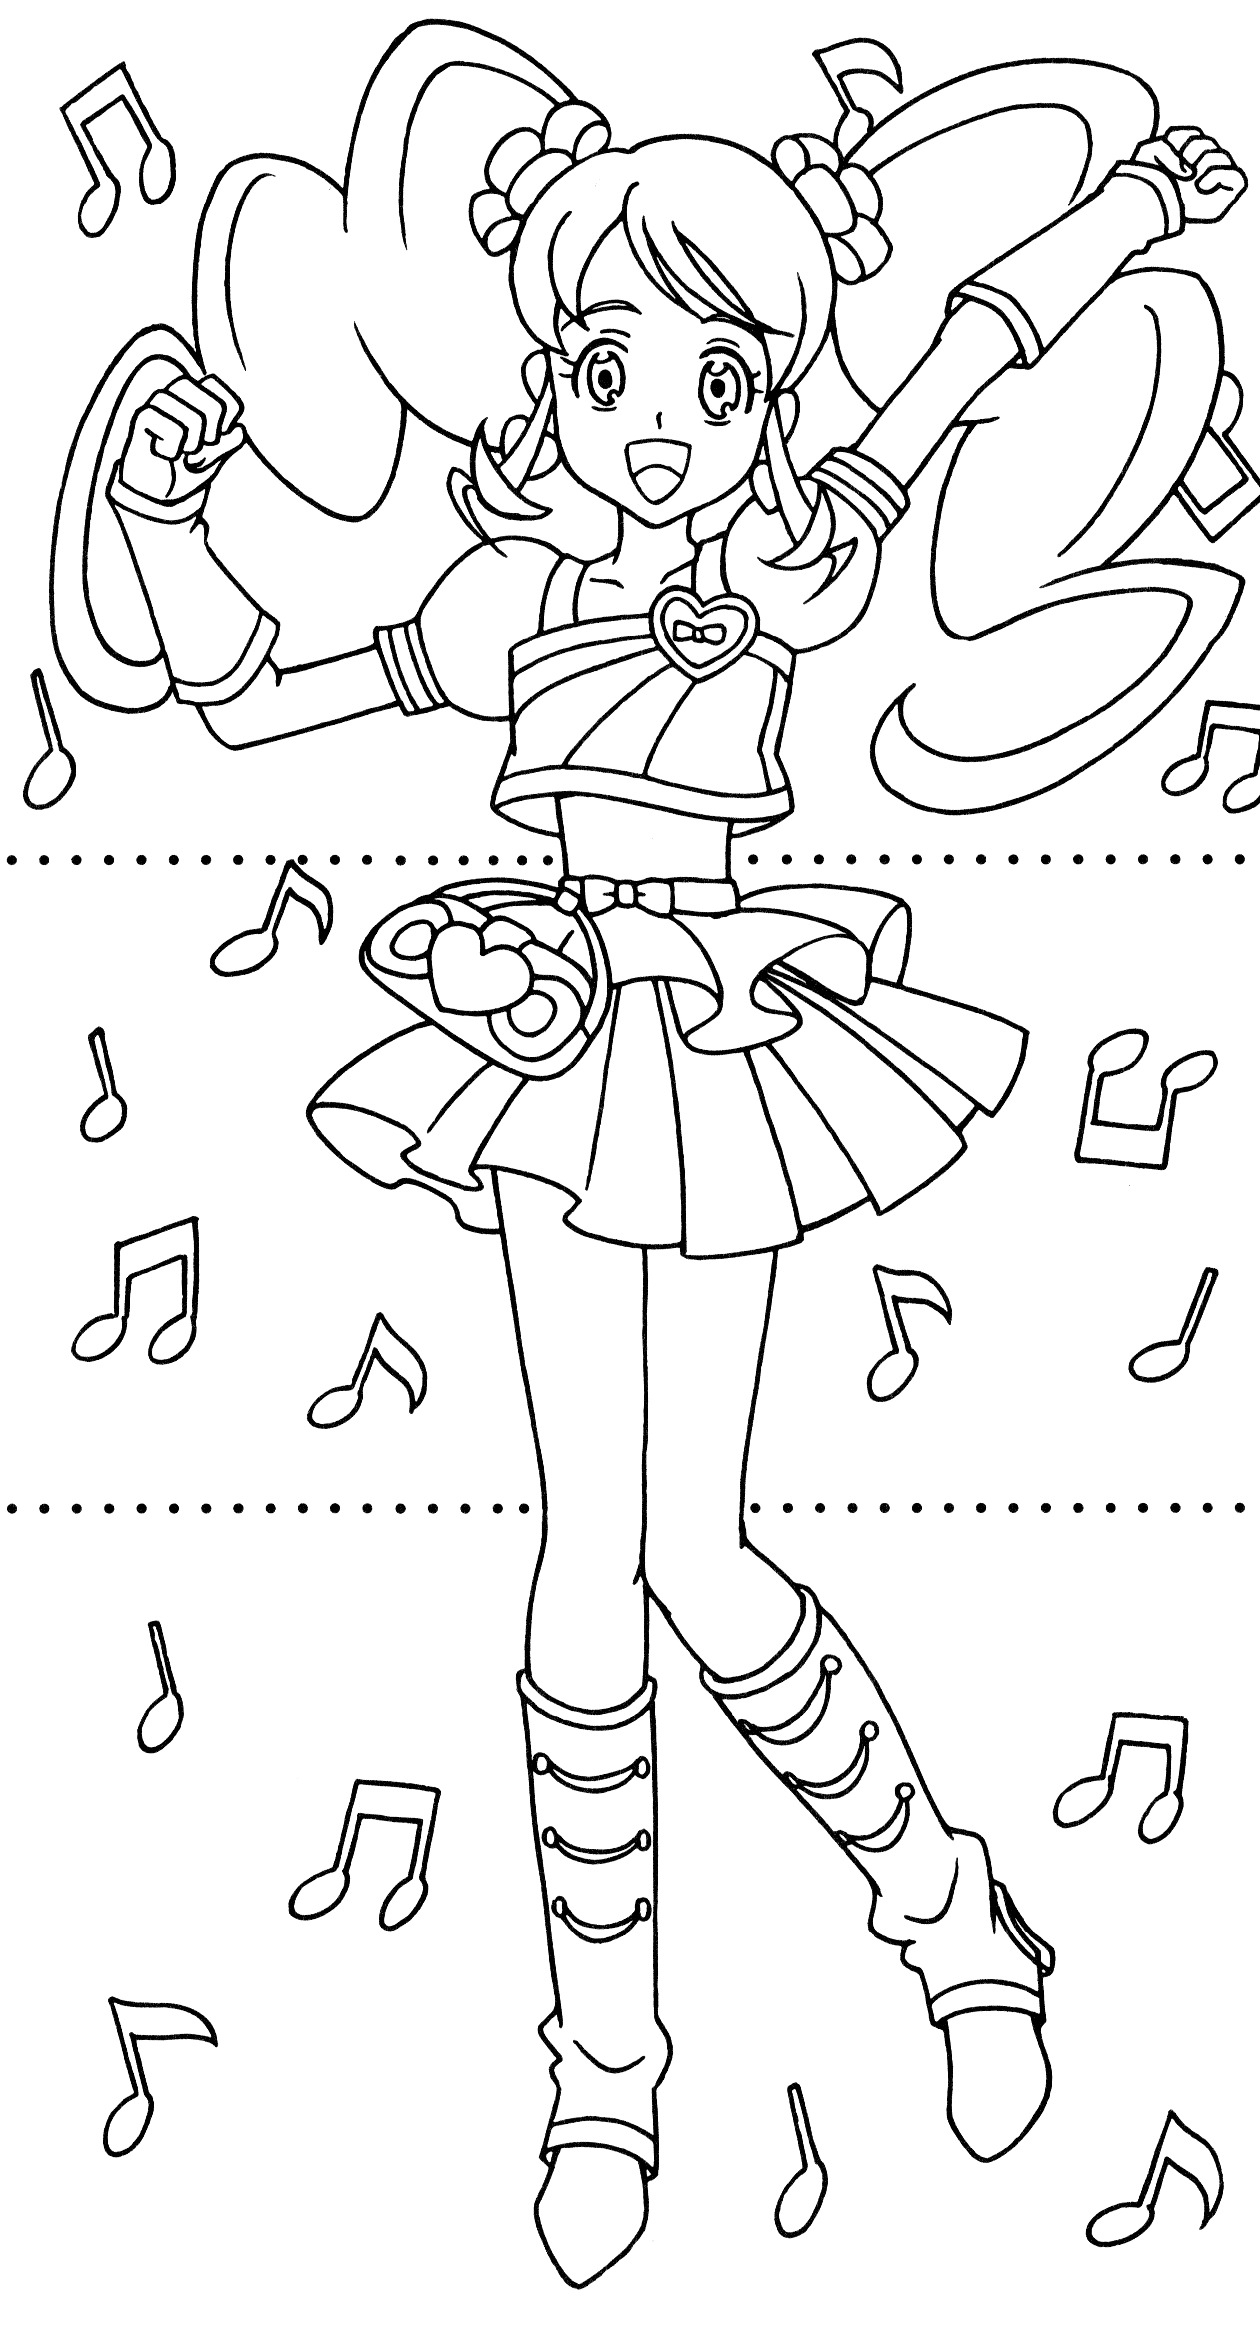 Happiness Charge Precure Dressup Coloring Book 23